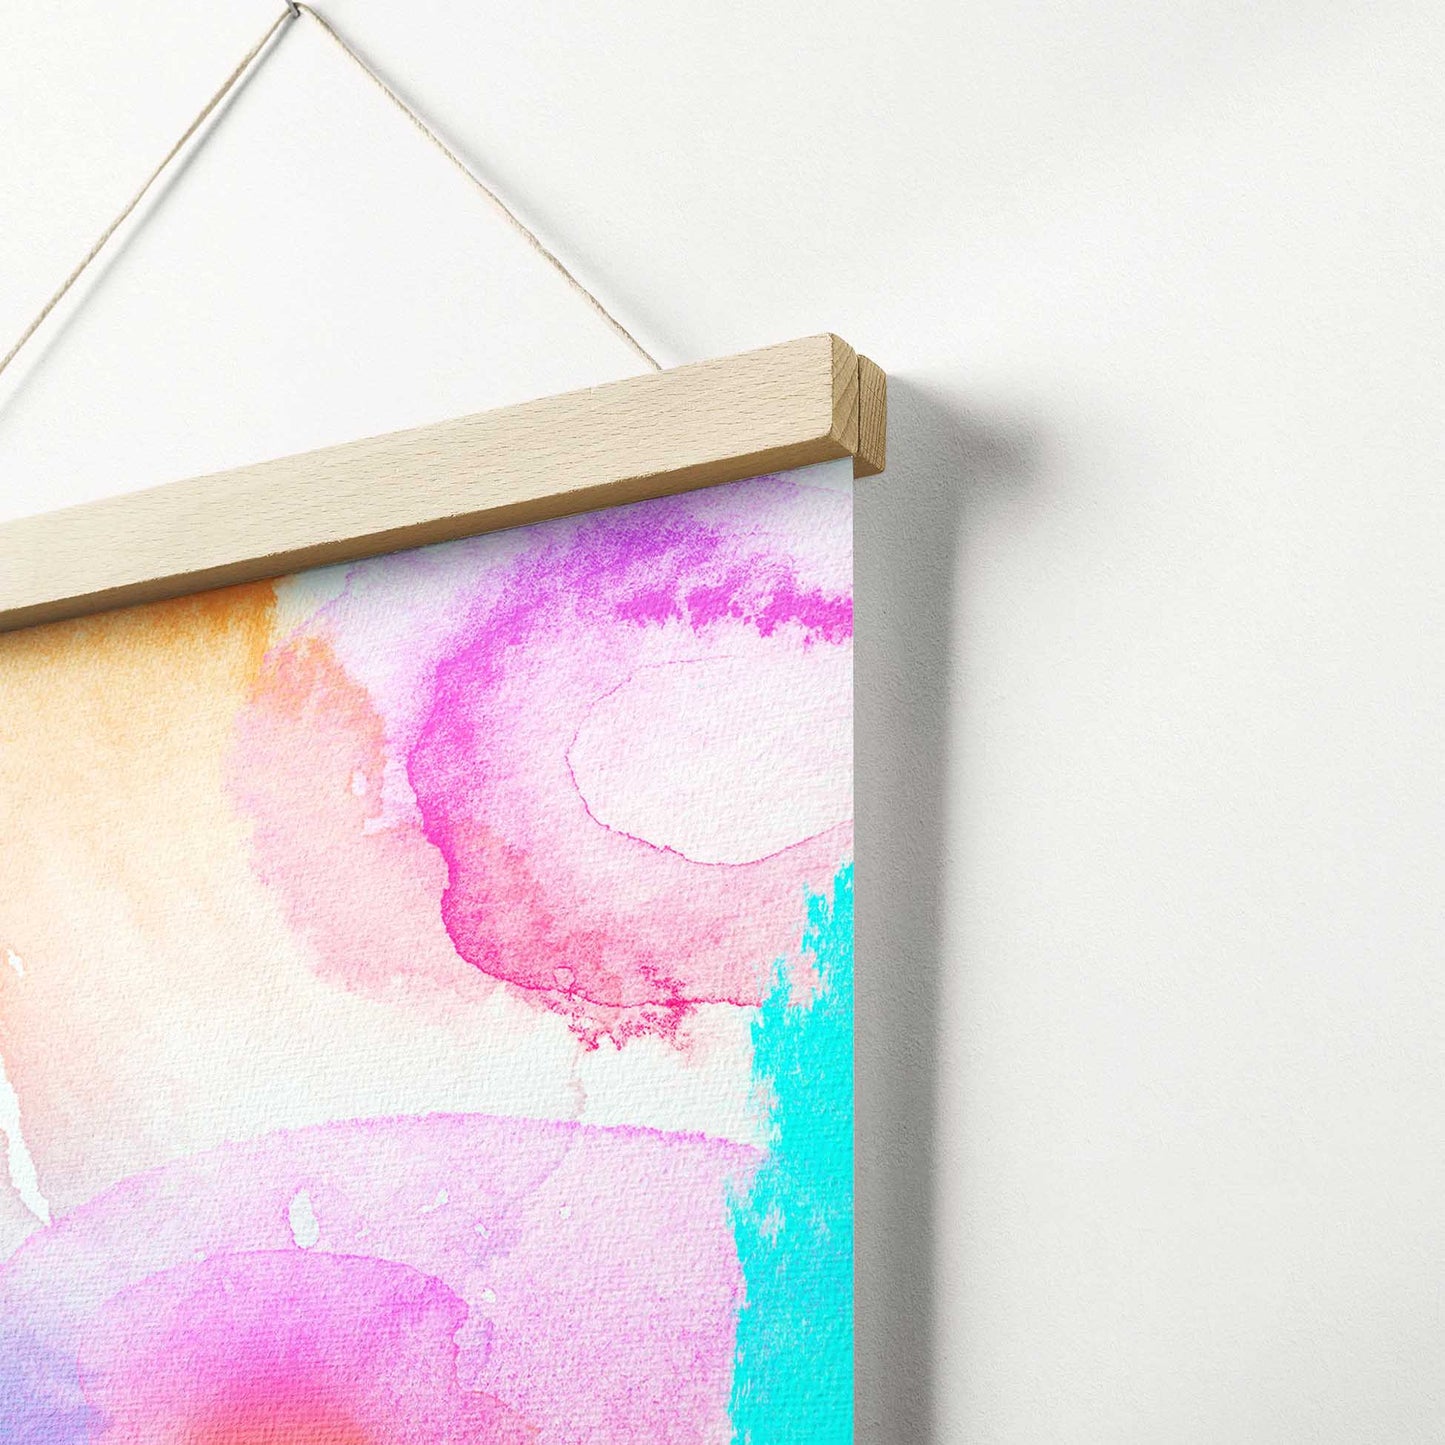 Unlock the creative potential and positive vibes with the Personalised Special Purple FX Poster Hanger. By printing your photos with a special effect filter in enchanting purple hues, this wall art becomes a vibrant and captivating piece